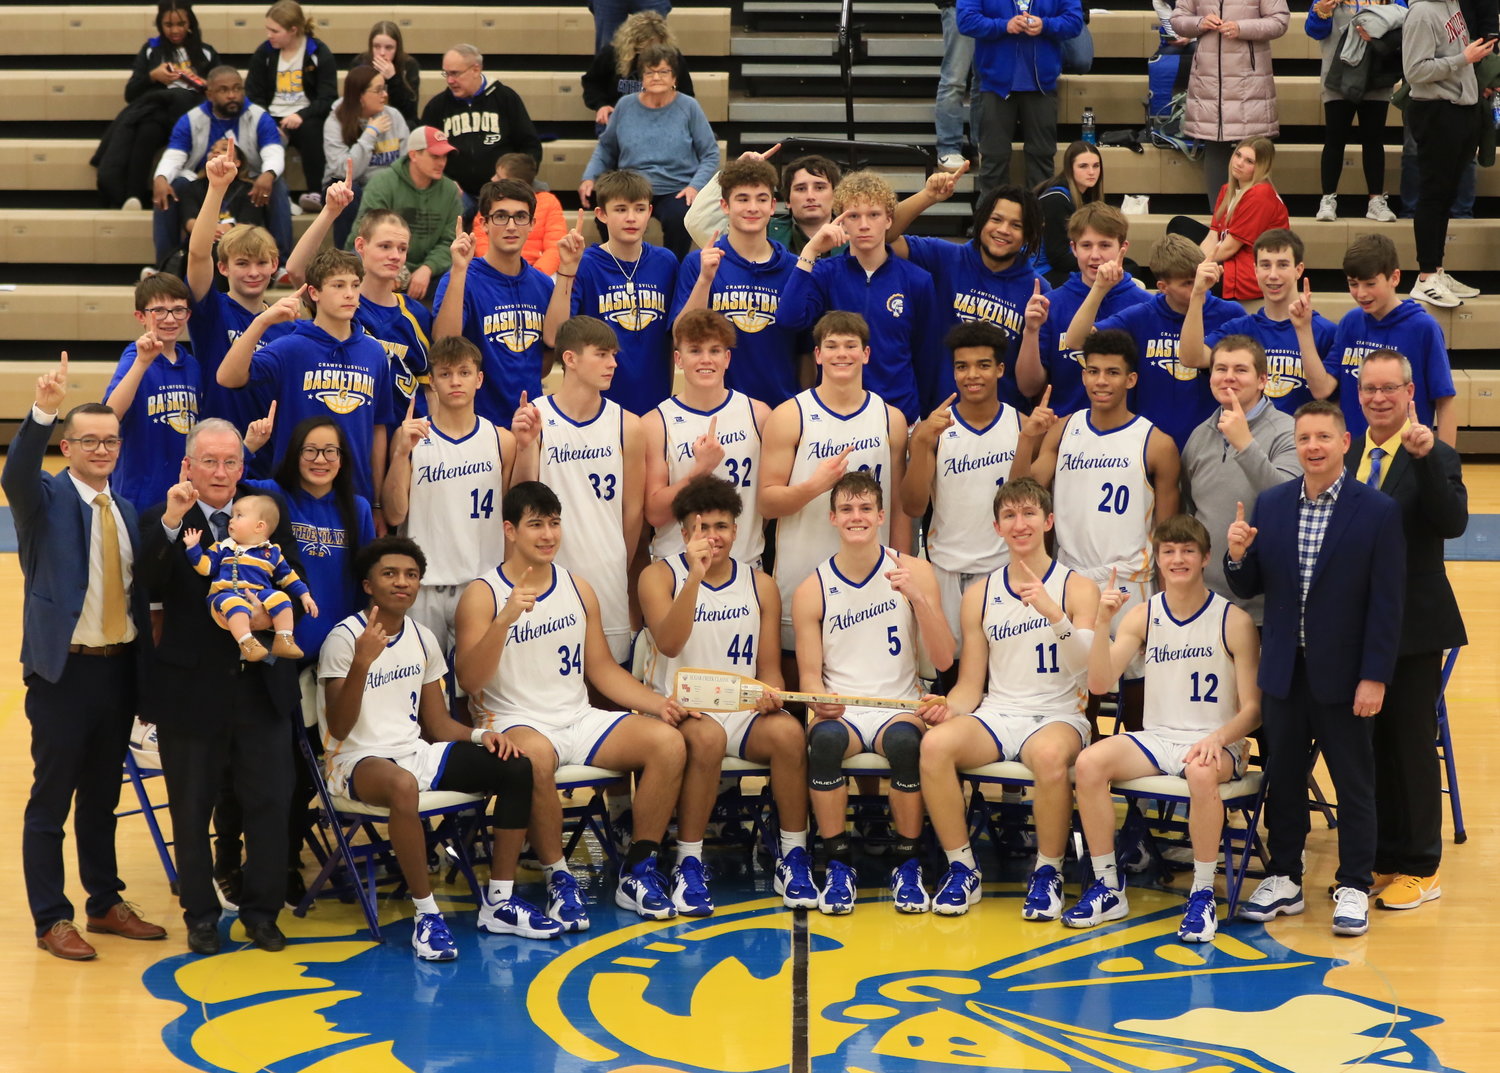 Crawfordsville was named the 2022 Sugar Creek Classic Champions with a 41-40 win over county rival Southmont.